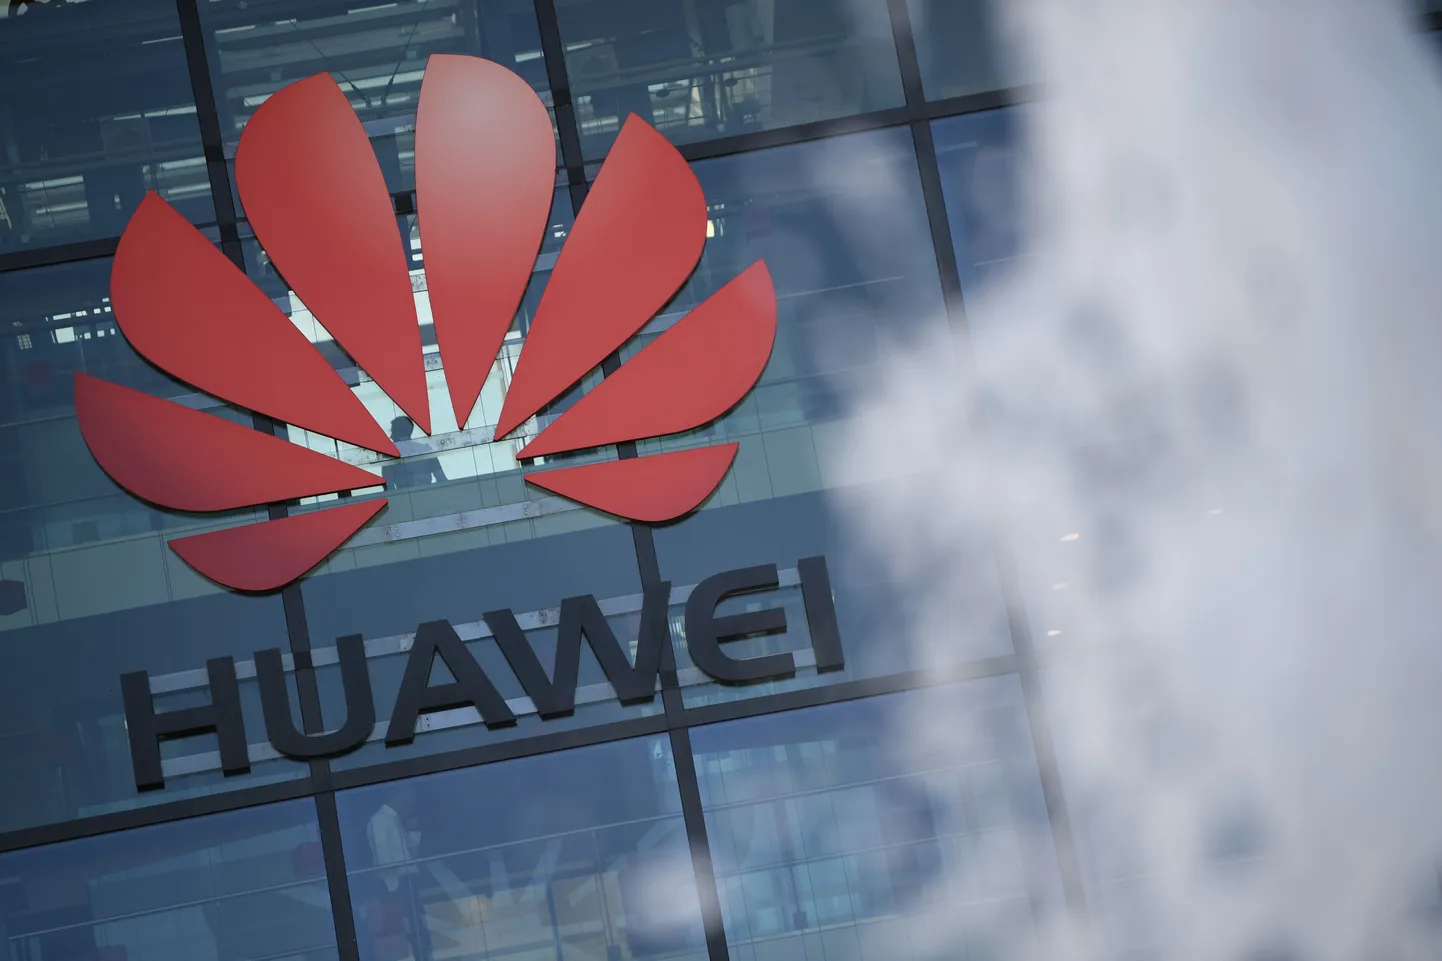 (FILES) In this file photo taken on January 28, 2020 A photograph shows the logo of Chinese company Huawei at their main UK offices in Reading, west of London, on January 28, 2020. - British telecoms giant Vodafone said on February 5, 2020 that it would cost 200 million euros ($221 million) over five years to remove Chinese group Huawei's equipment from core 5G European activities. (Photo by DANIEL LEAL-OLIVAS / AFP)